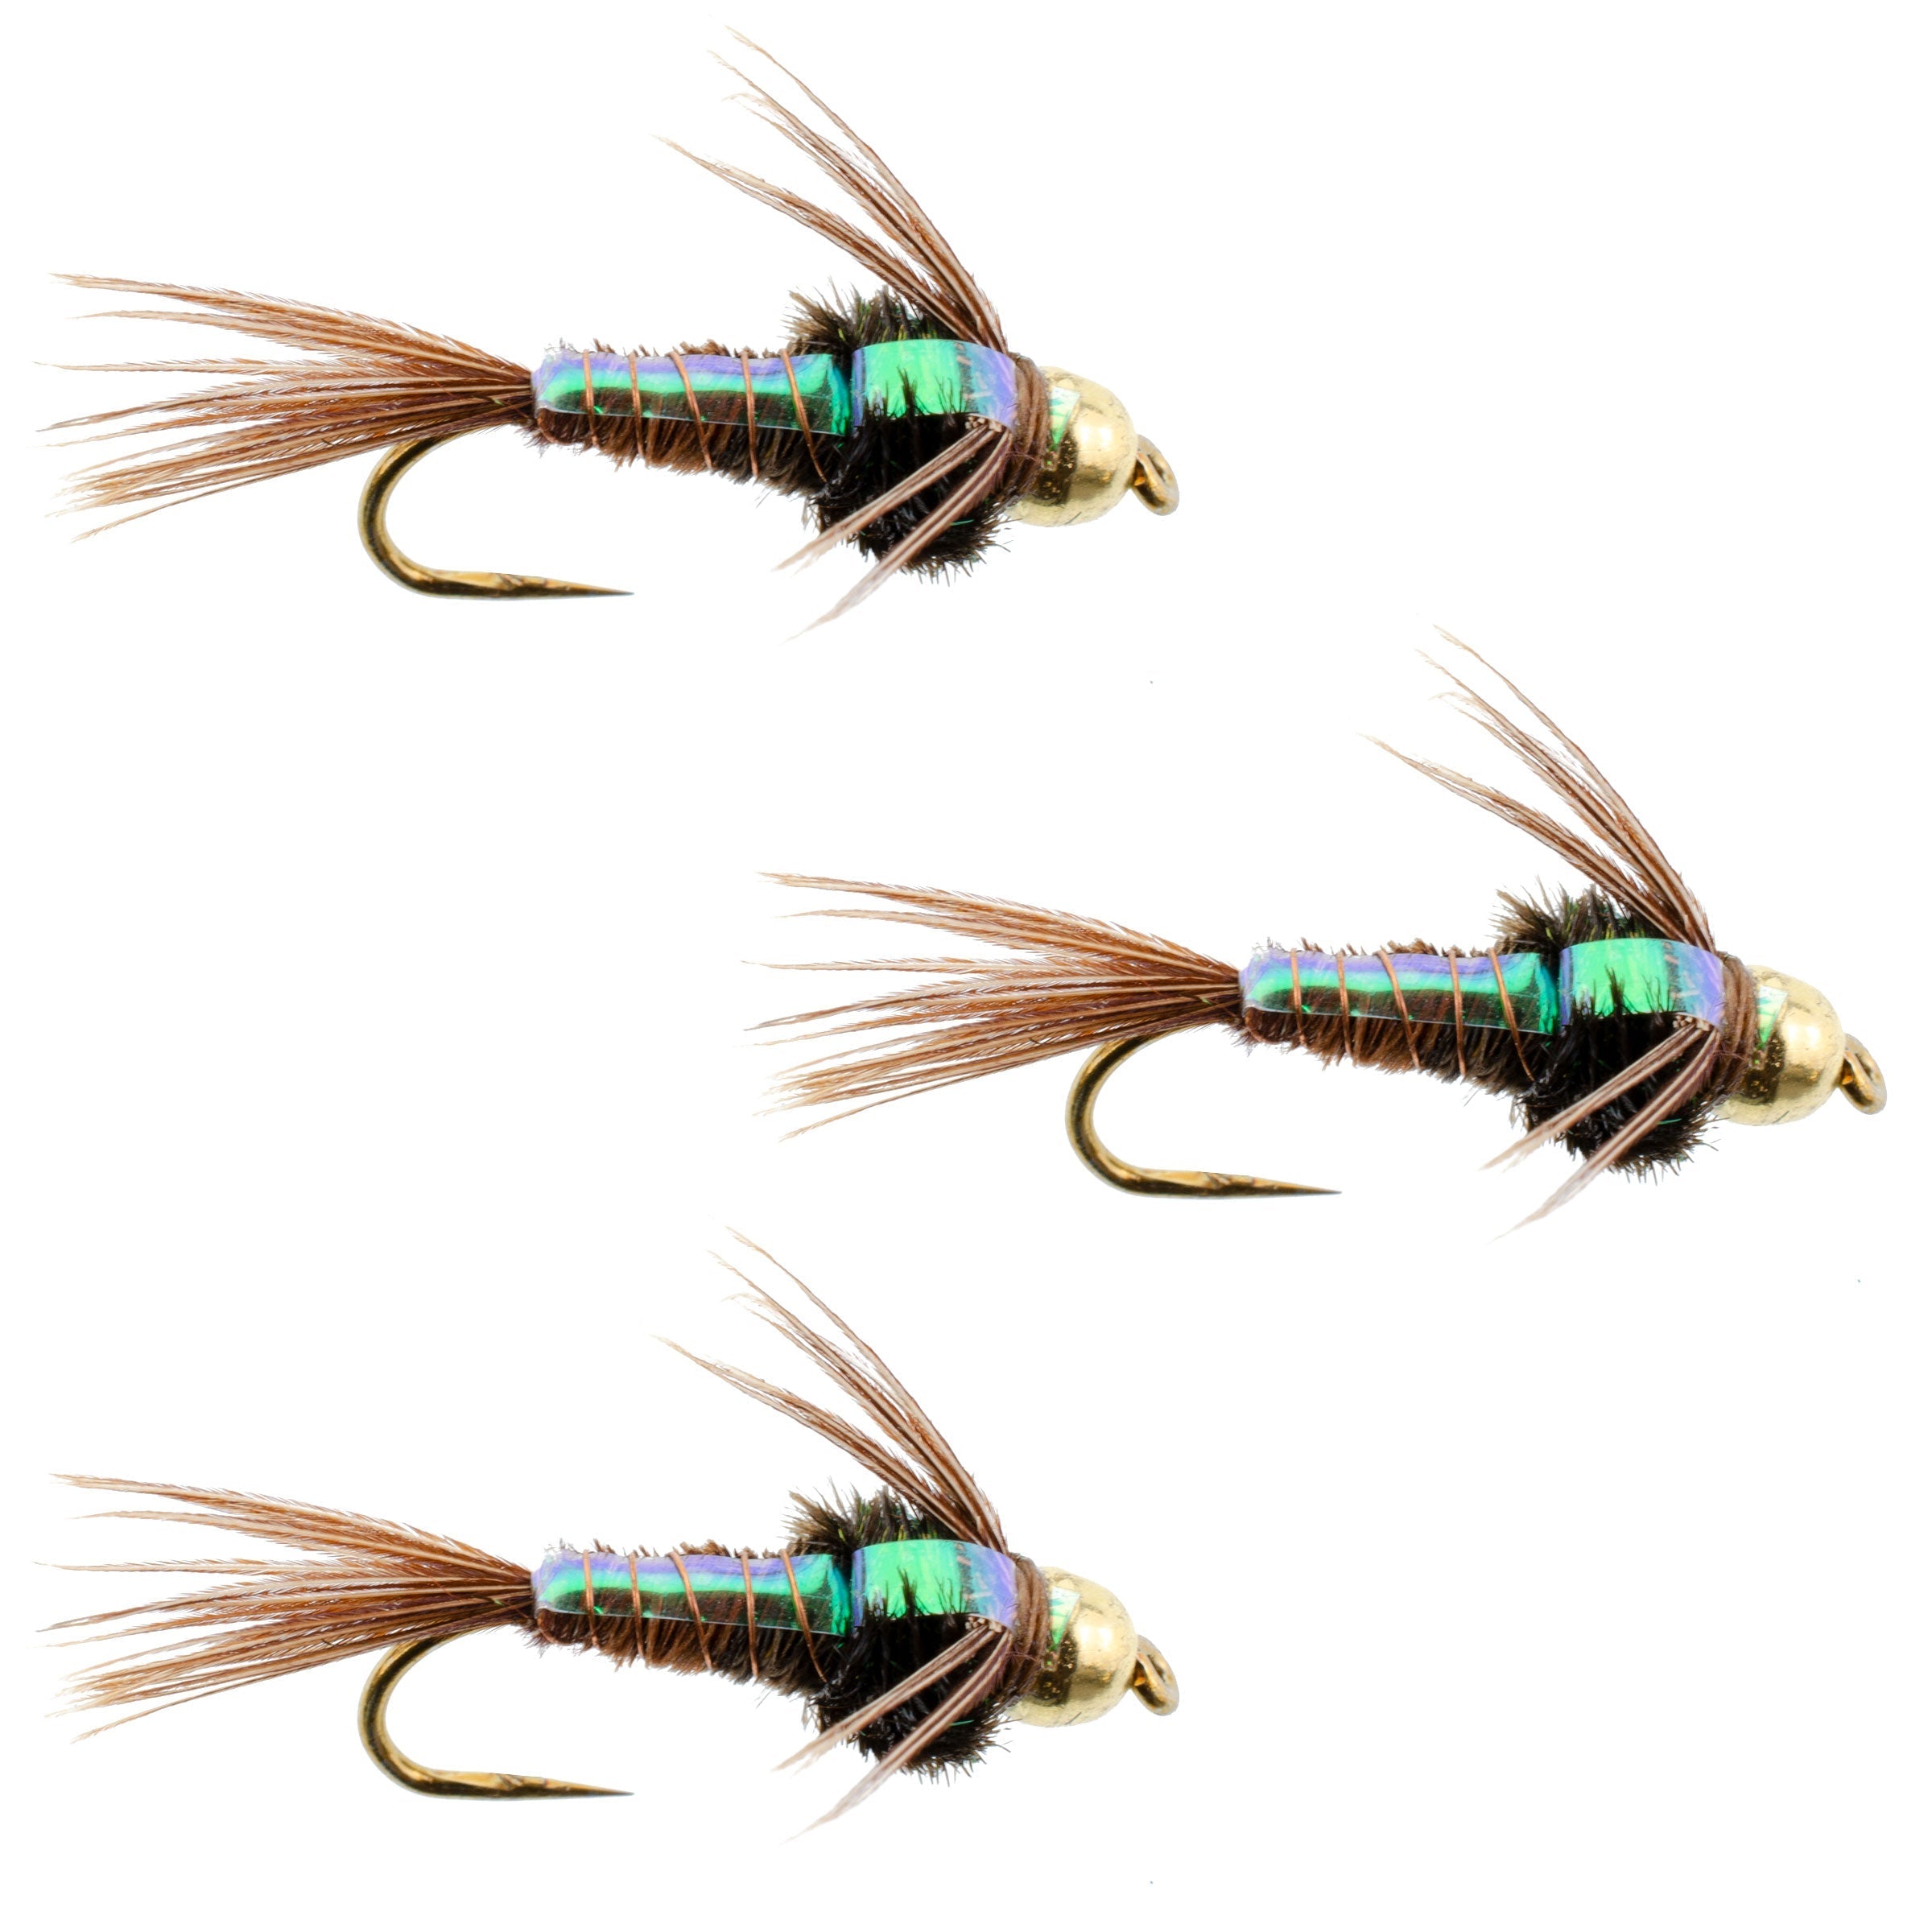 3 Pack Barbless Bead Head Flashback Pheasant Tail Nymph Flies Hook Size 14